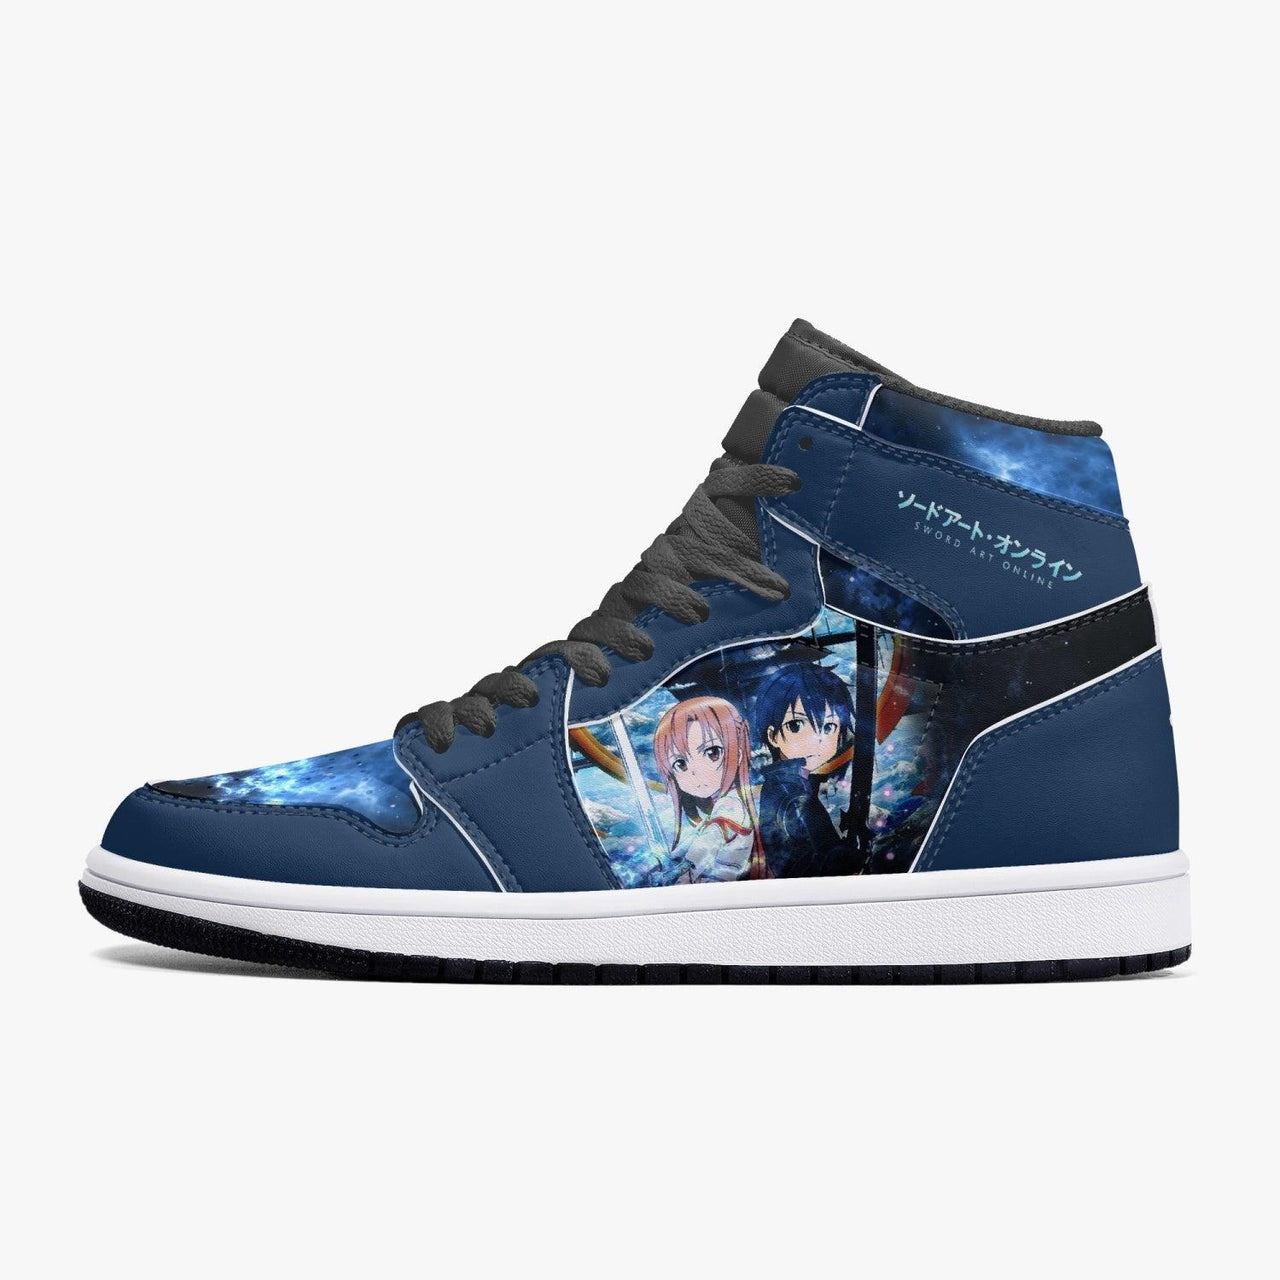 Kirito JD13 Sneakers: Blue & Light Blue Style Inspired by Sword